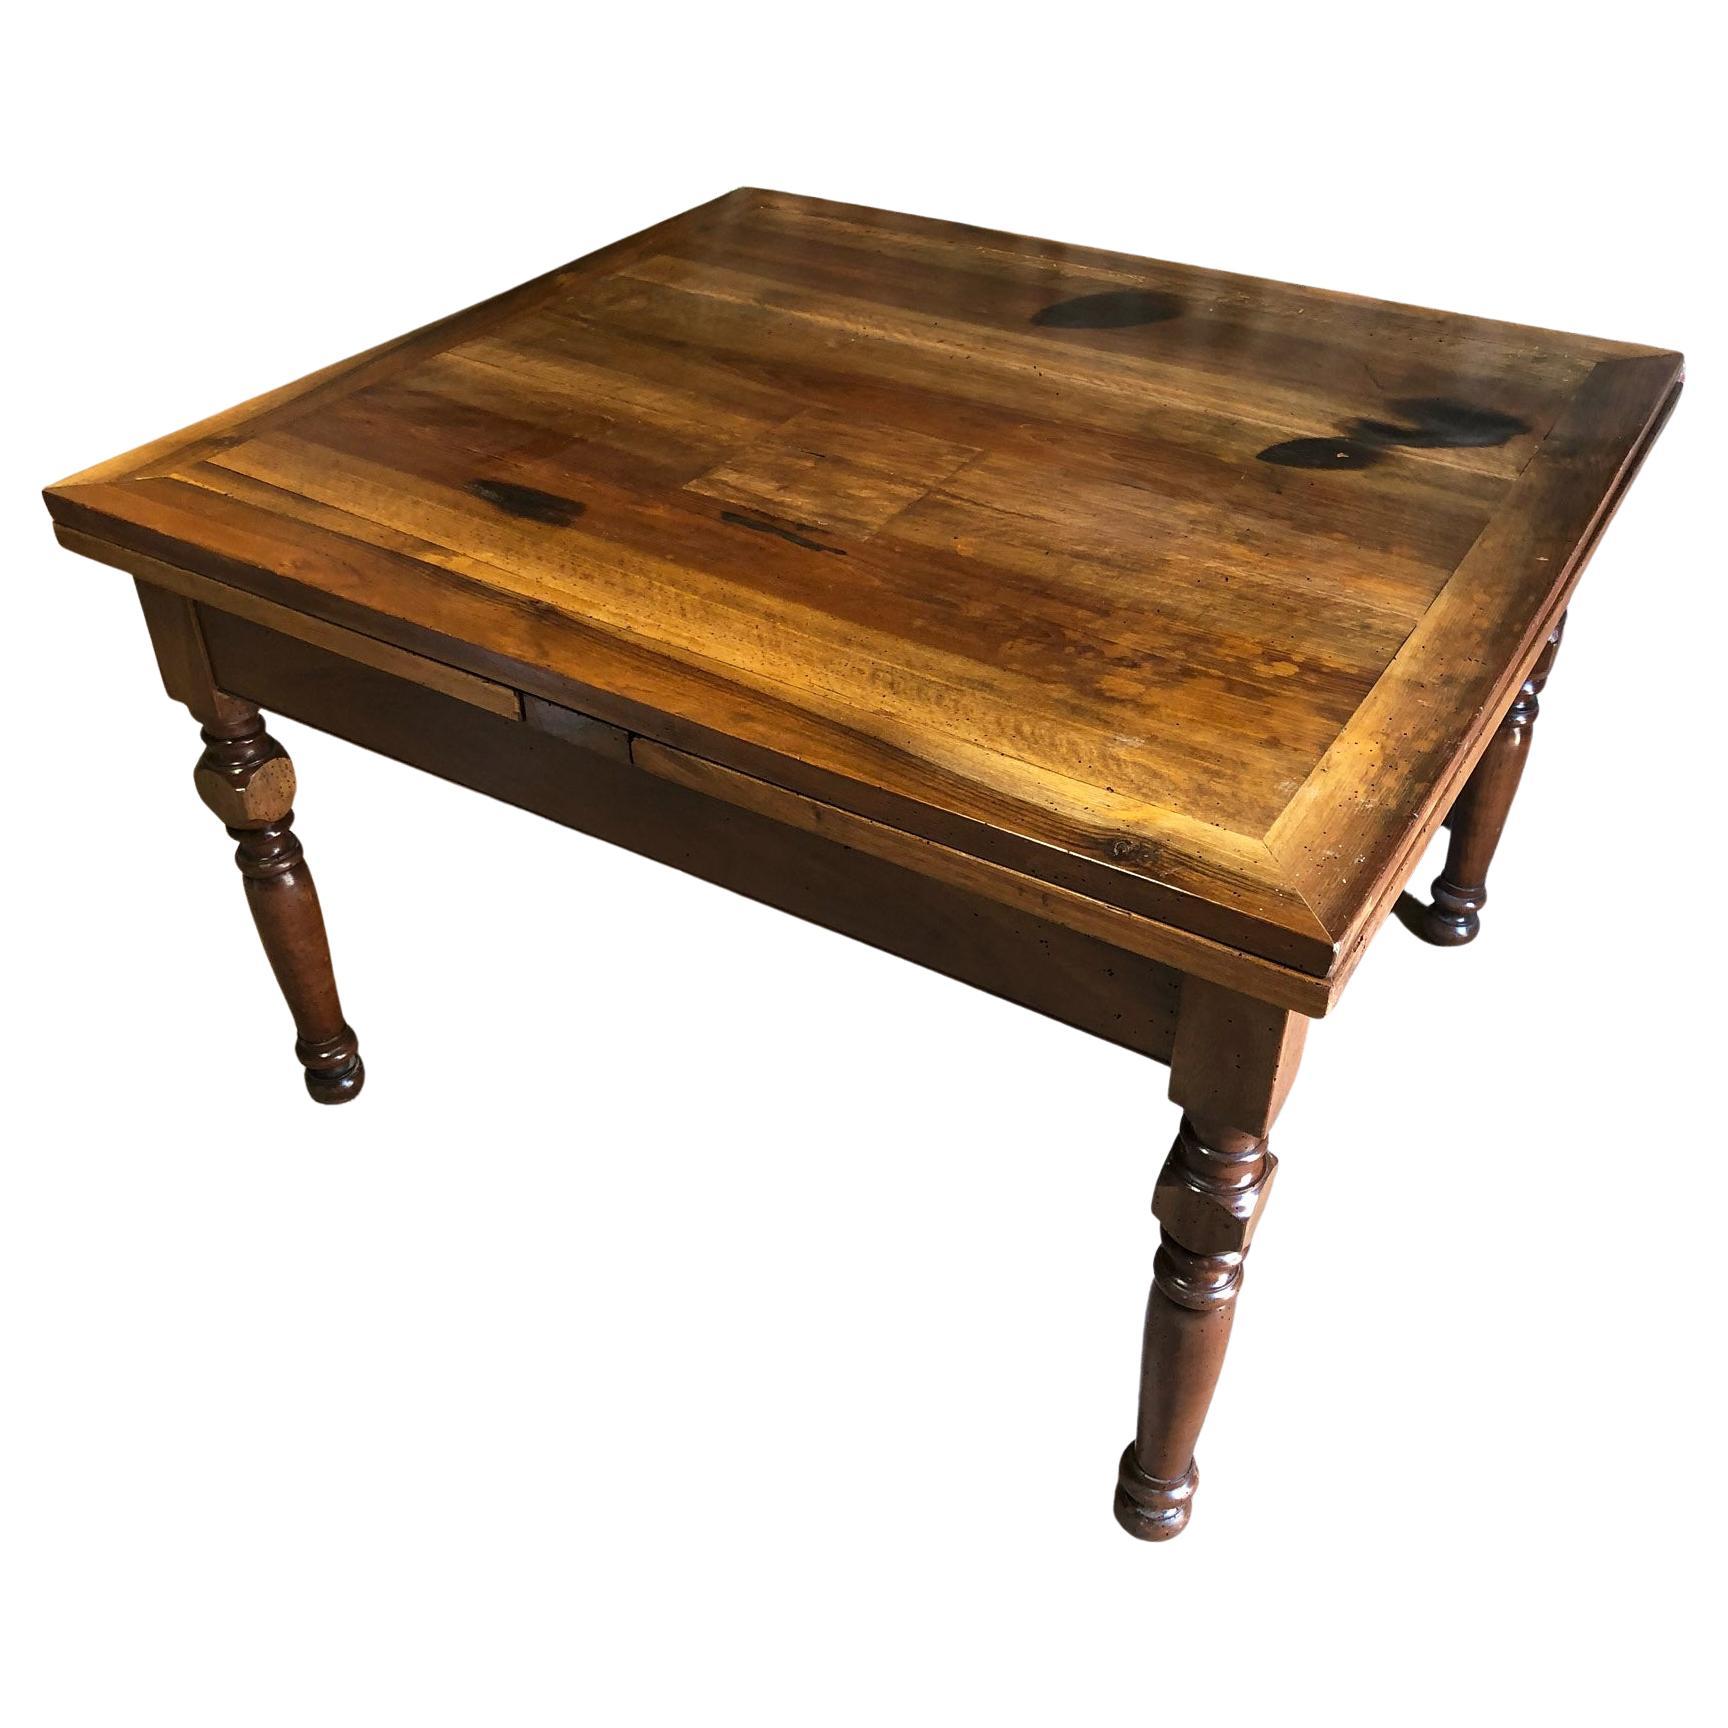 Extendable Table in Solid Tuscan Walnut, Original Farmhouse